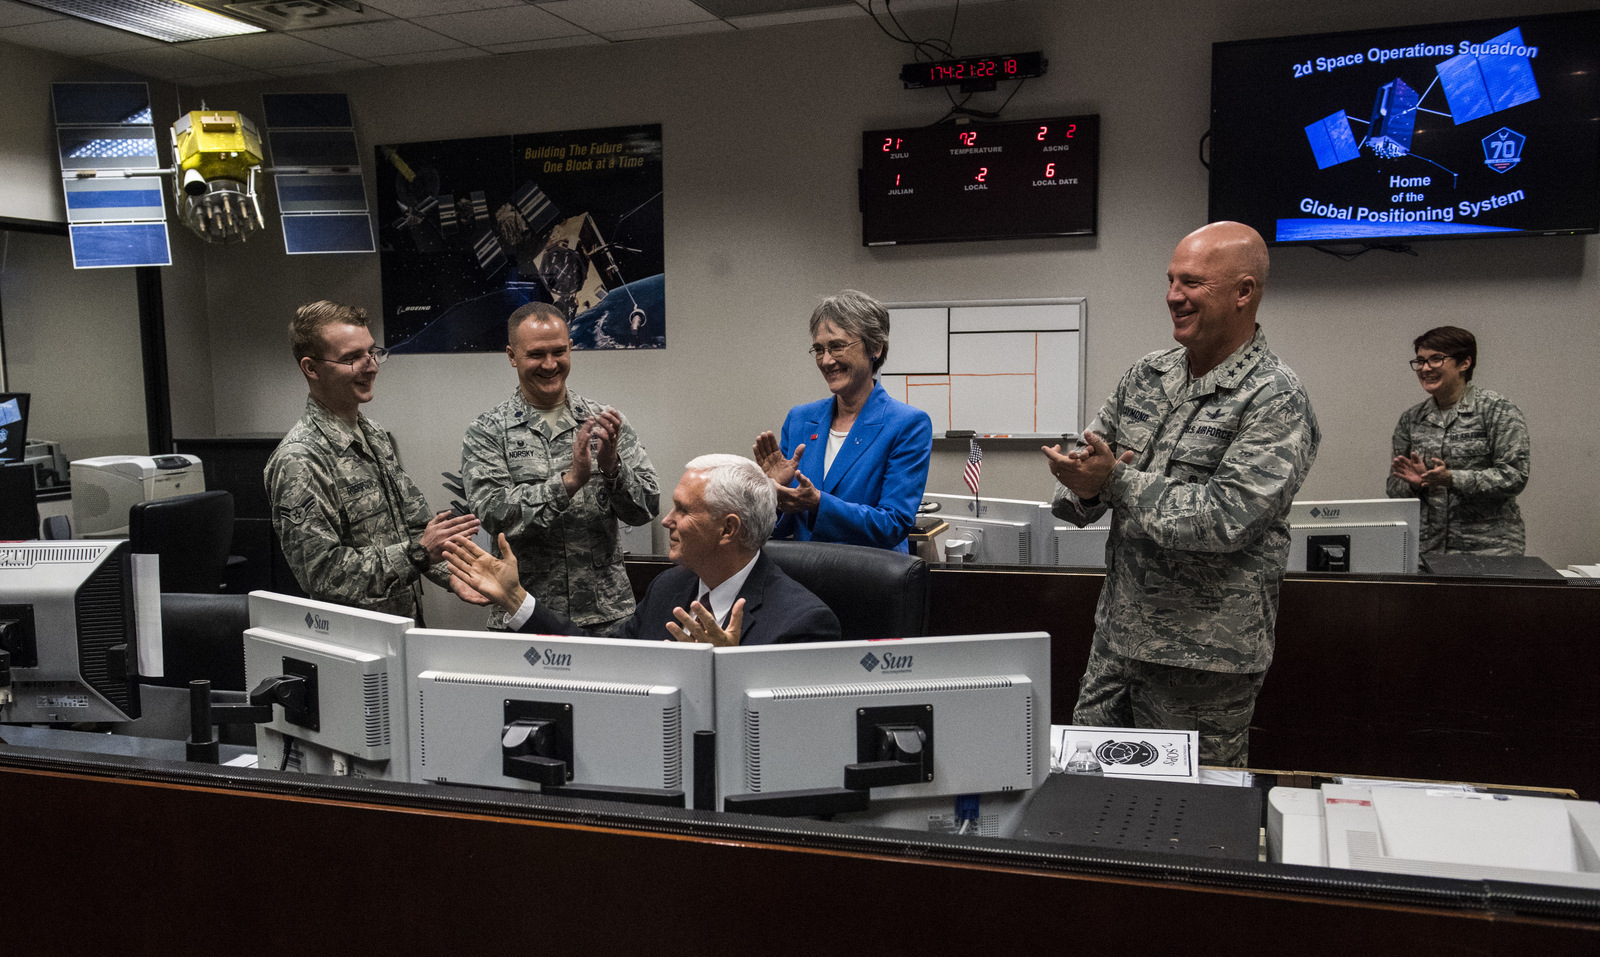 Vice President Mike Pence learns how to send a command to a satellite dish while touring the 2d Space Operations Squadron, Home of the Global Positioning System, at Schriever Air Force Base Friday, June 23, 2017, during his visit to Colorado Springs, Colo. (Christian Murdock/The Gazette via AP)